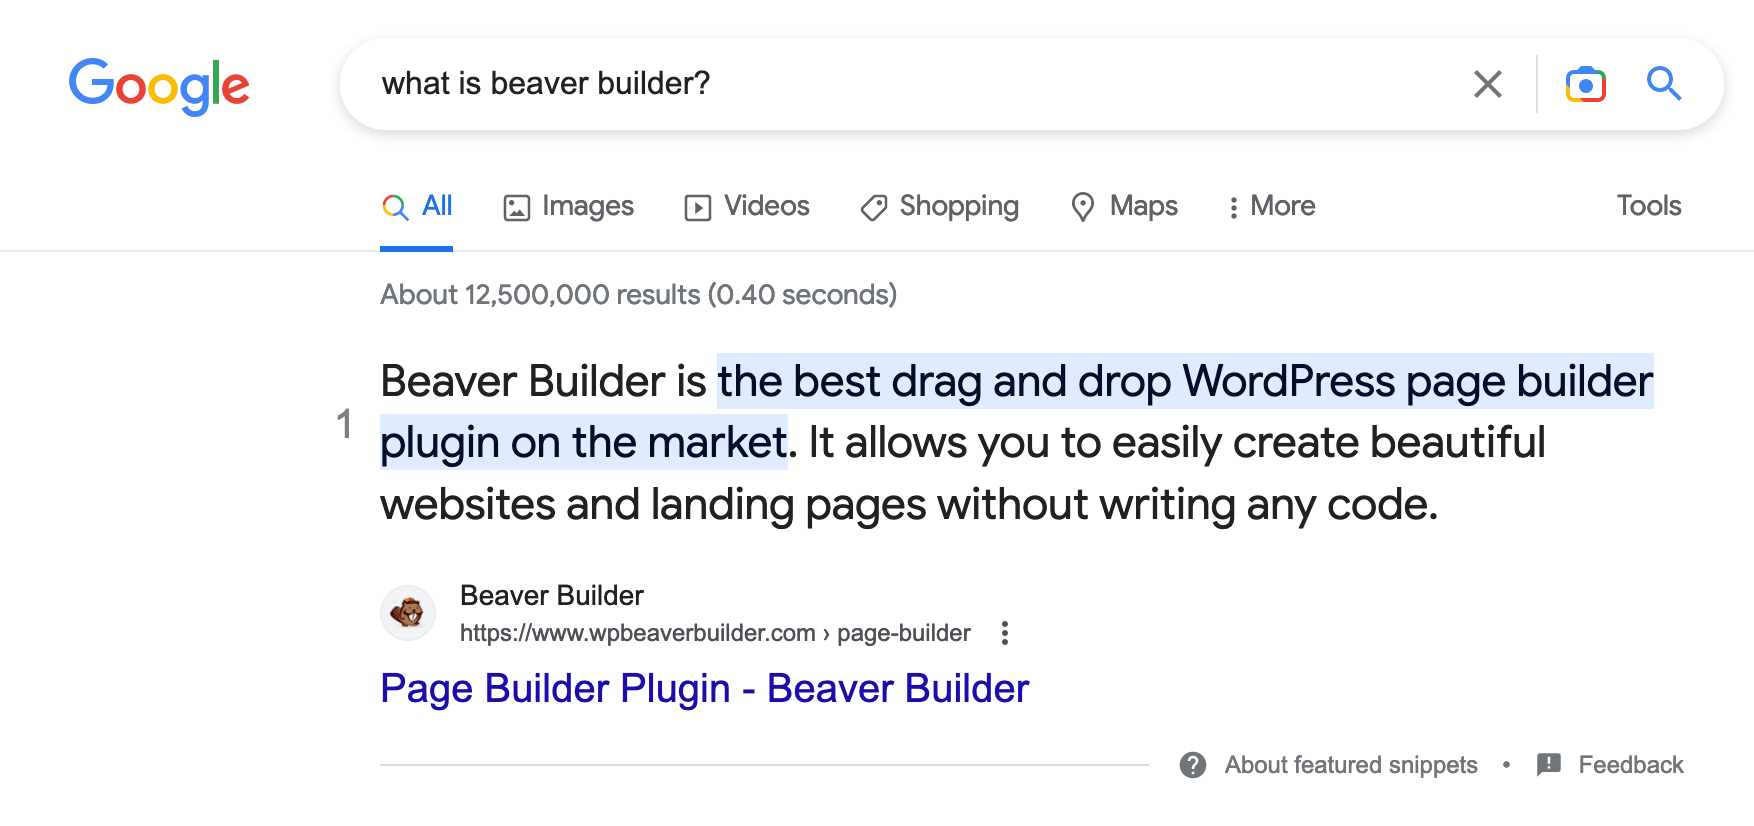 The featured snippet displayed when "what is beaver builder" is typed into Google.